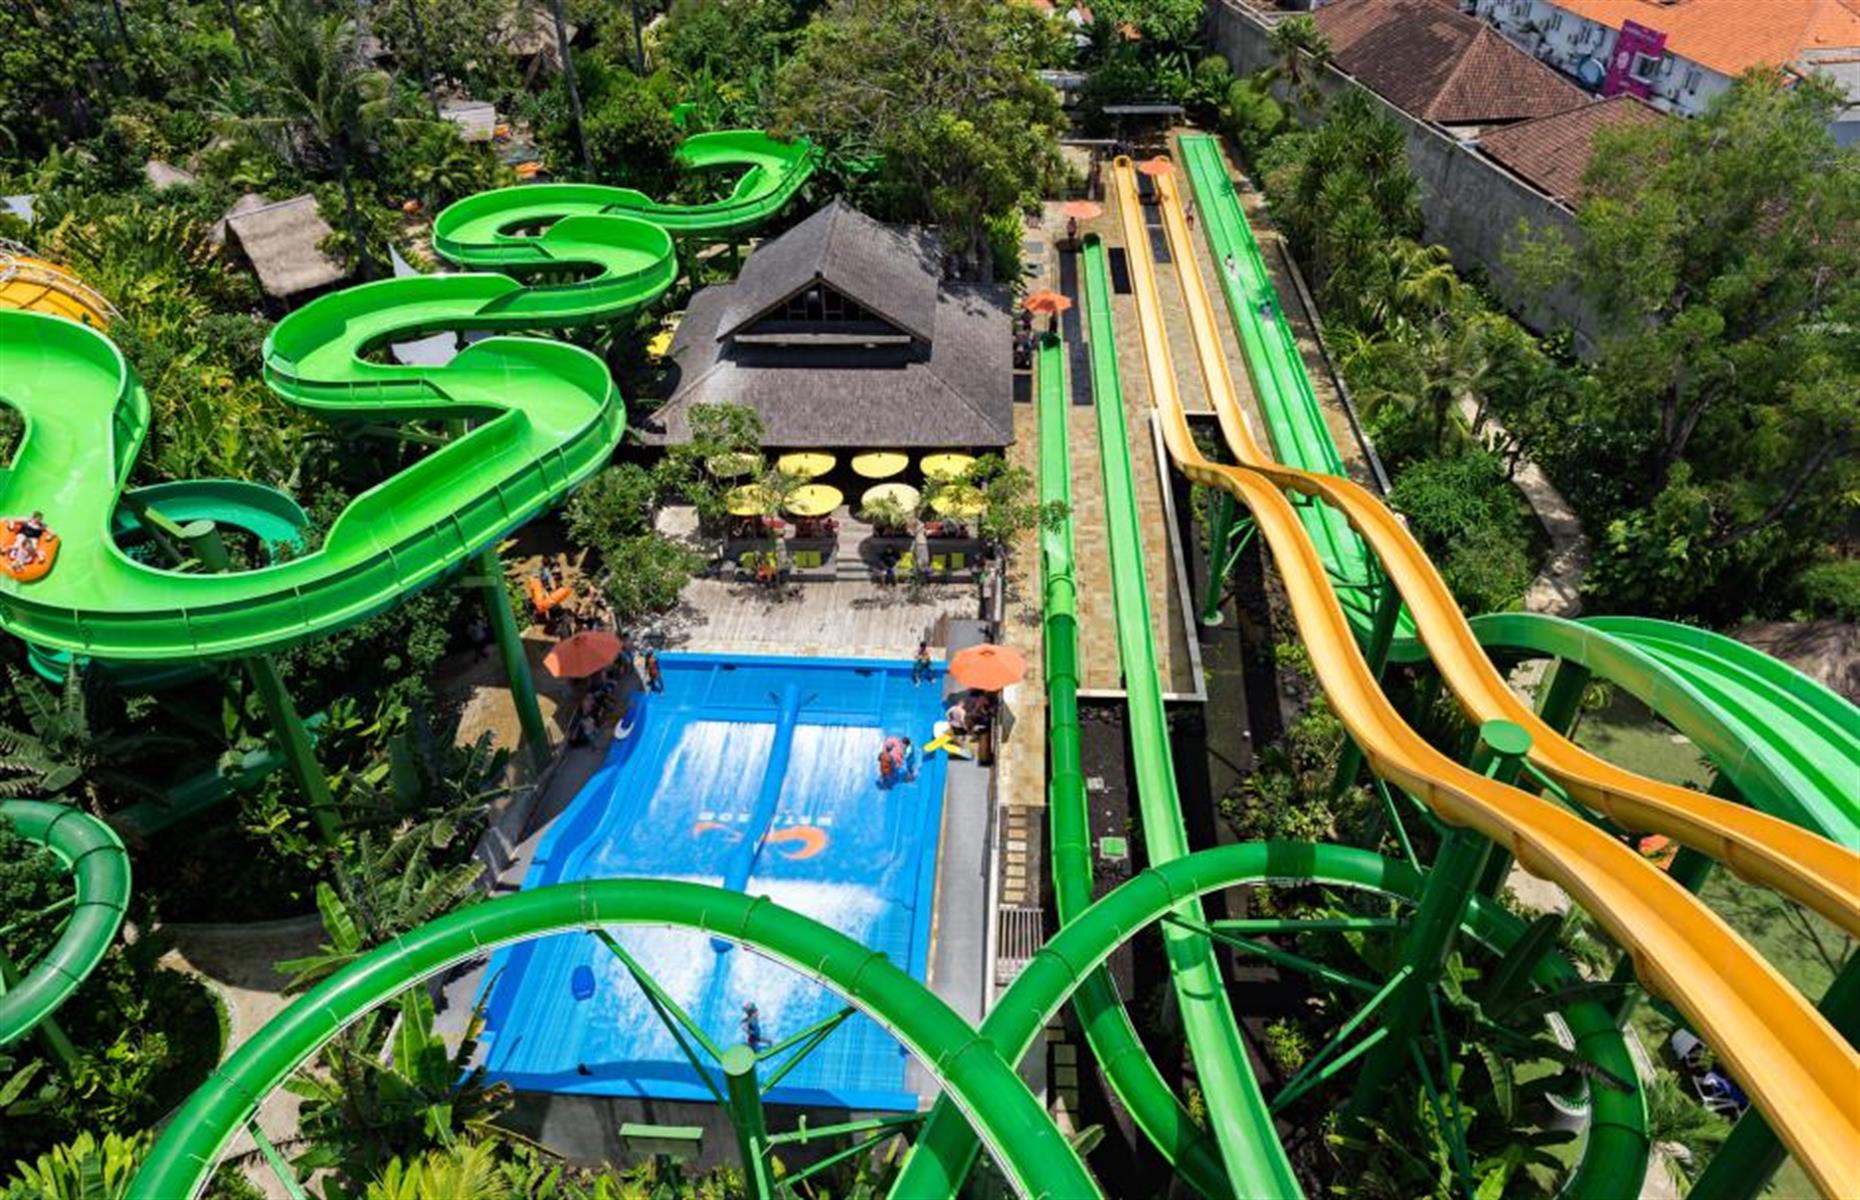 <p>Slip, splash and scream your way around <a href="https://waterbom-bali.com/">this fantastic attraction in Bali</a>, which was recently named Tripadvisor's top water park in Asia and one of the best in the world. Its various slides and rides are ranked from 'mellow' to 'extreme'. The Climax (Asia's steepest slide) and Smashdown 2.0 with a sheer 85-foot (26m) drop are definitely the latter. Need to calm your nerves? There's a swim-up cocktail bar where you can sip as you gaze at the lush tropical garden surroundings.</p>